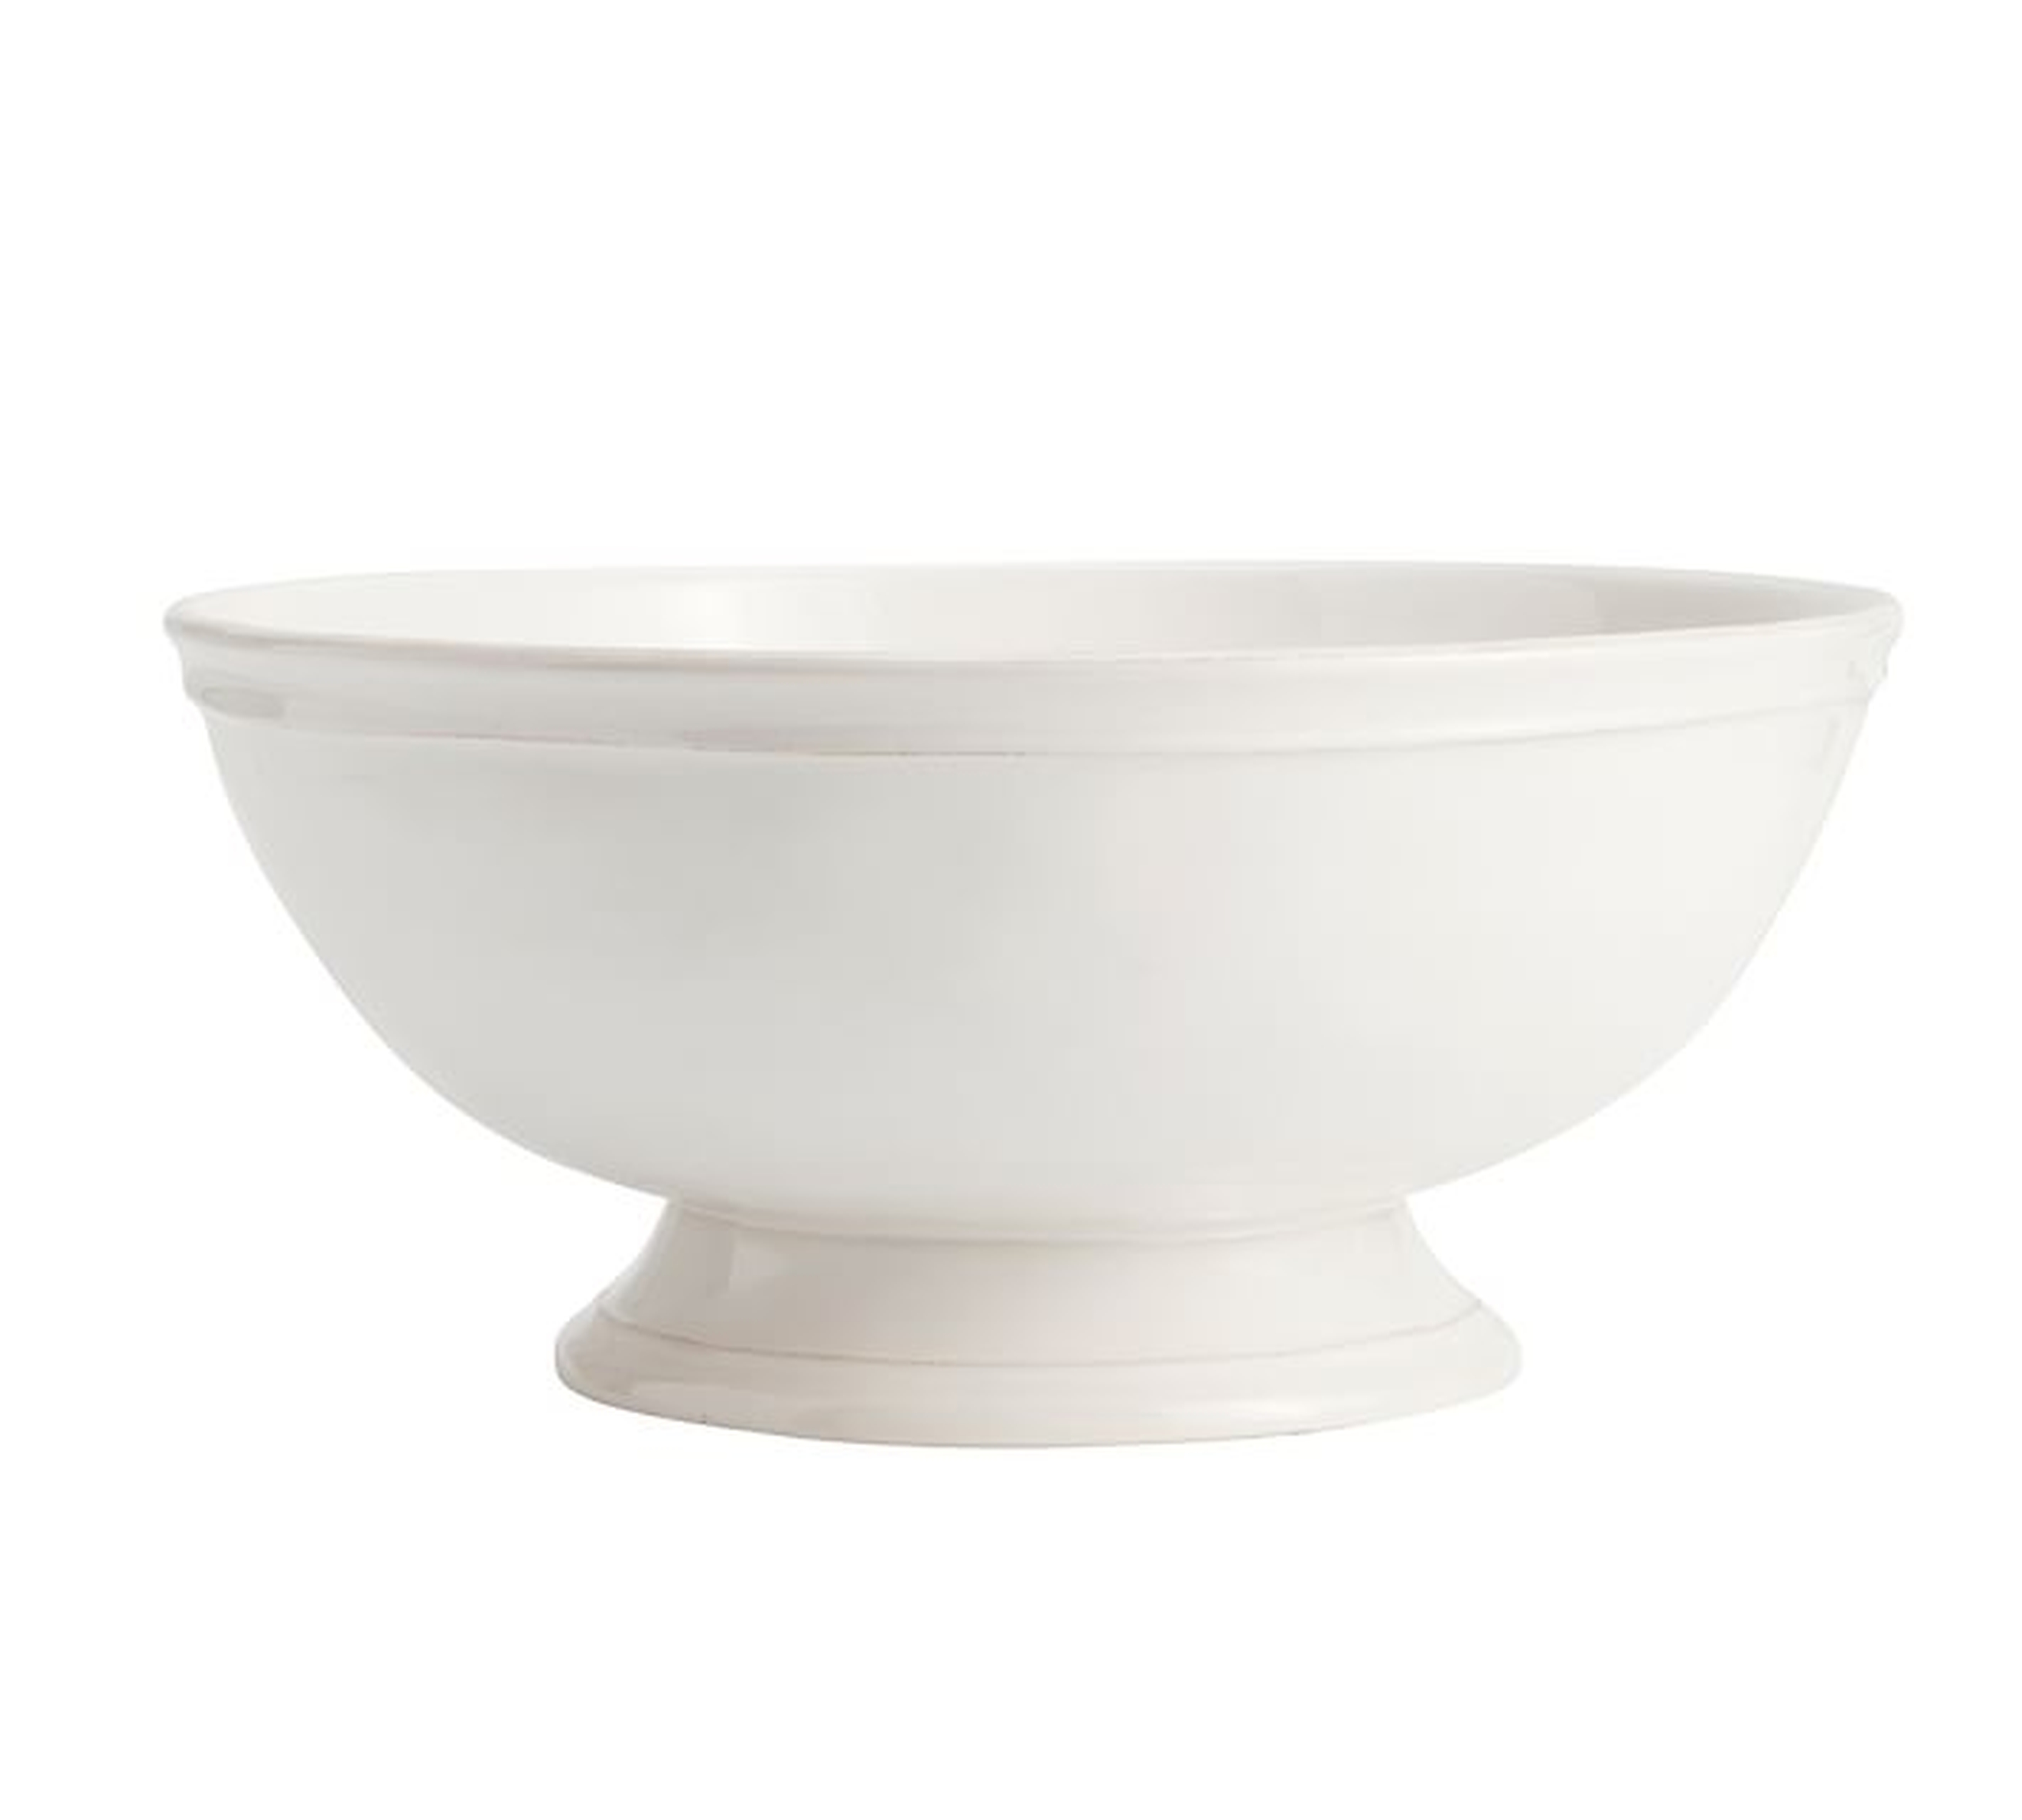 Cambria Footed Serve Bowl, Stone, 12.5" - Pottery Barn